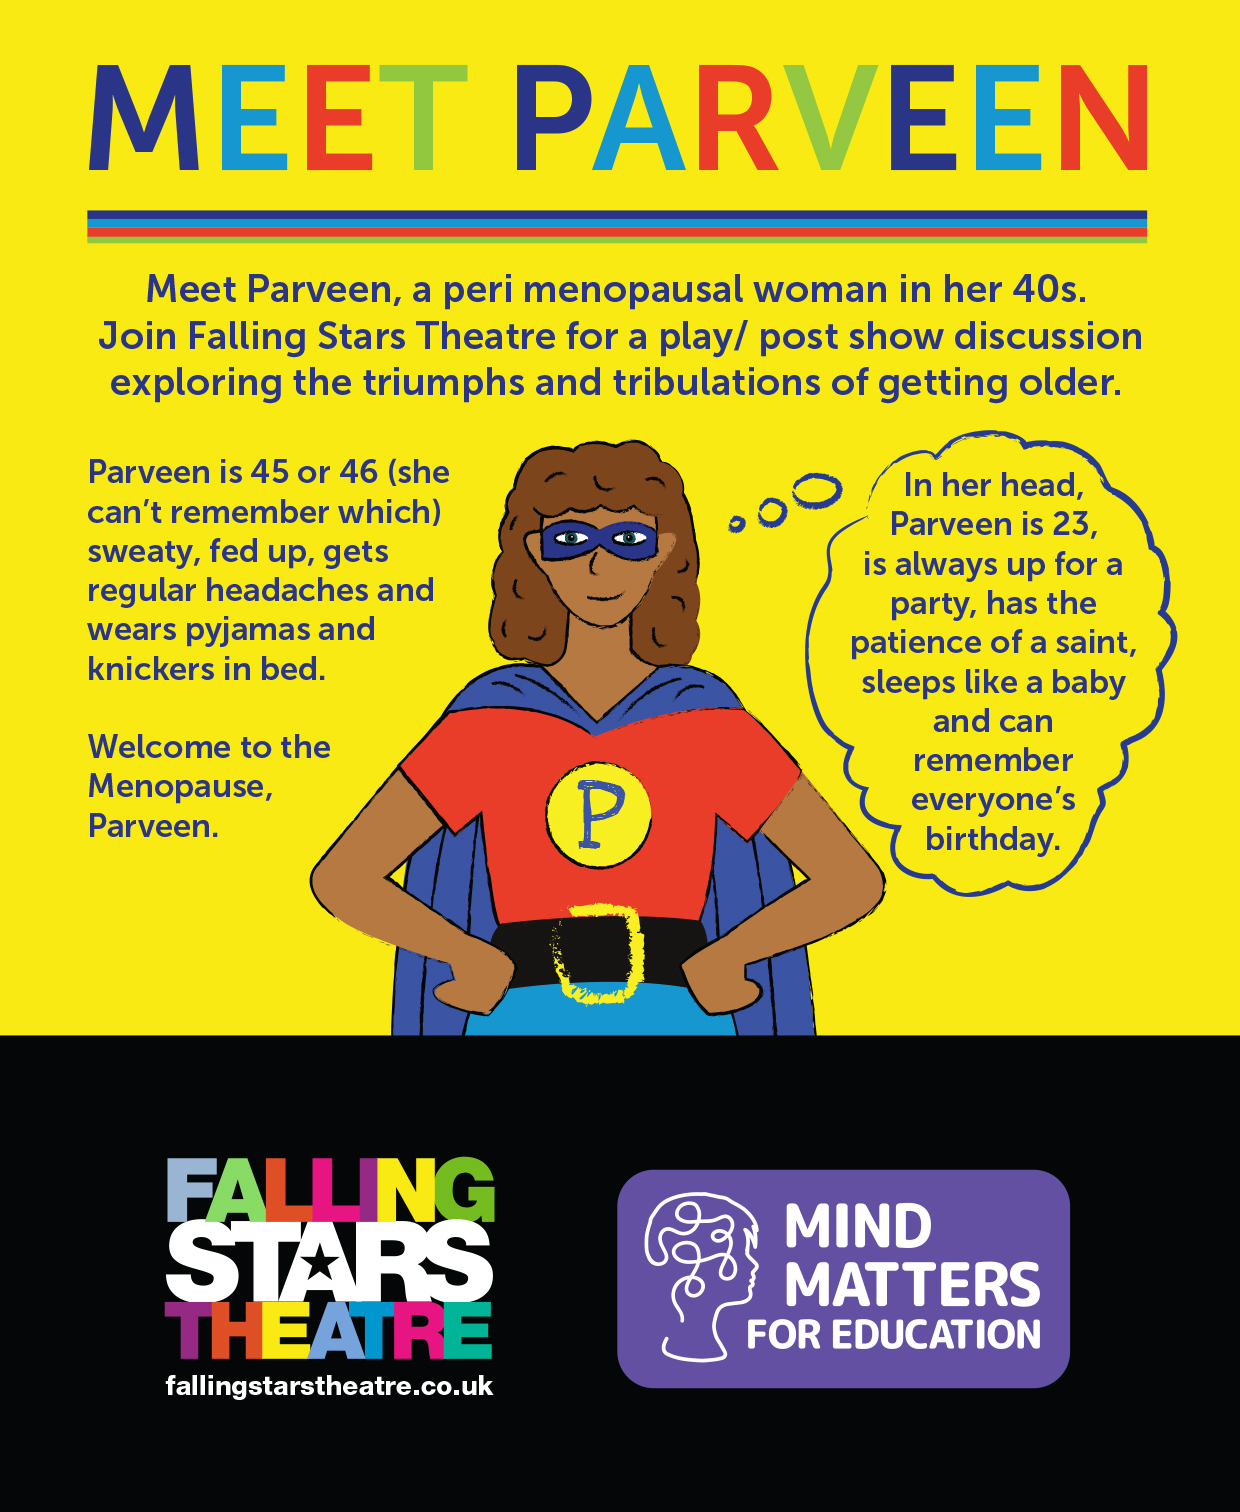 Meet Parveen, a peri menopausal woman in her 40s. Join Falling Stars Theatre for a play/post show discussion exploring the triumphs and tribulations of getting older.